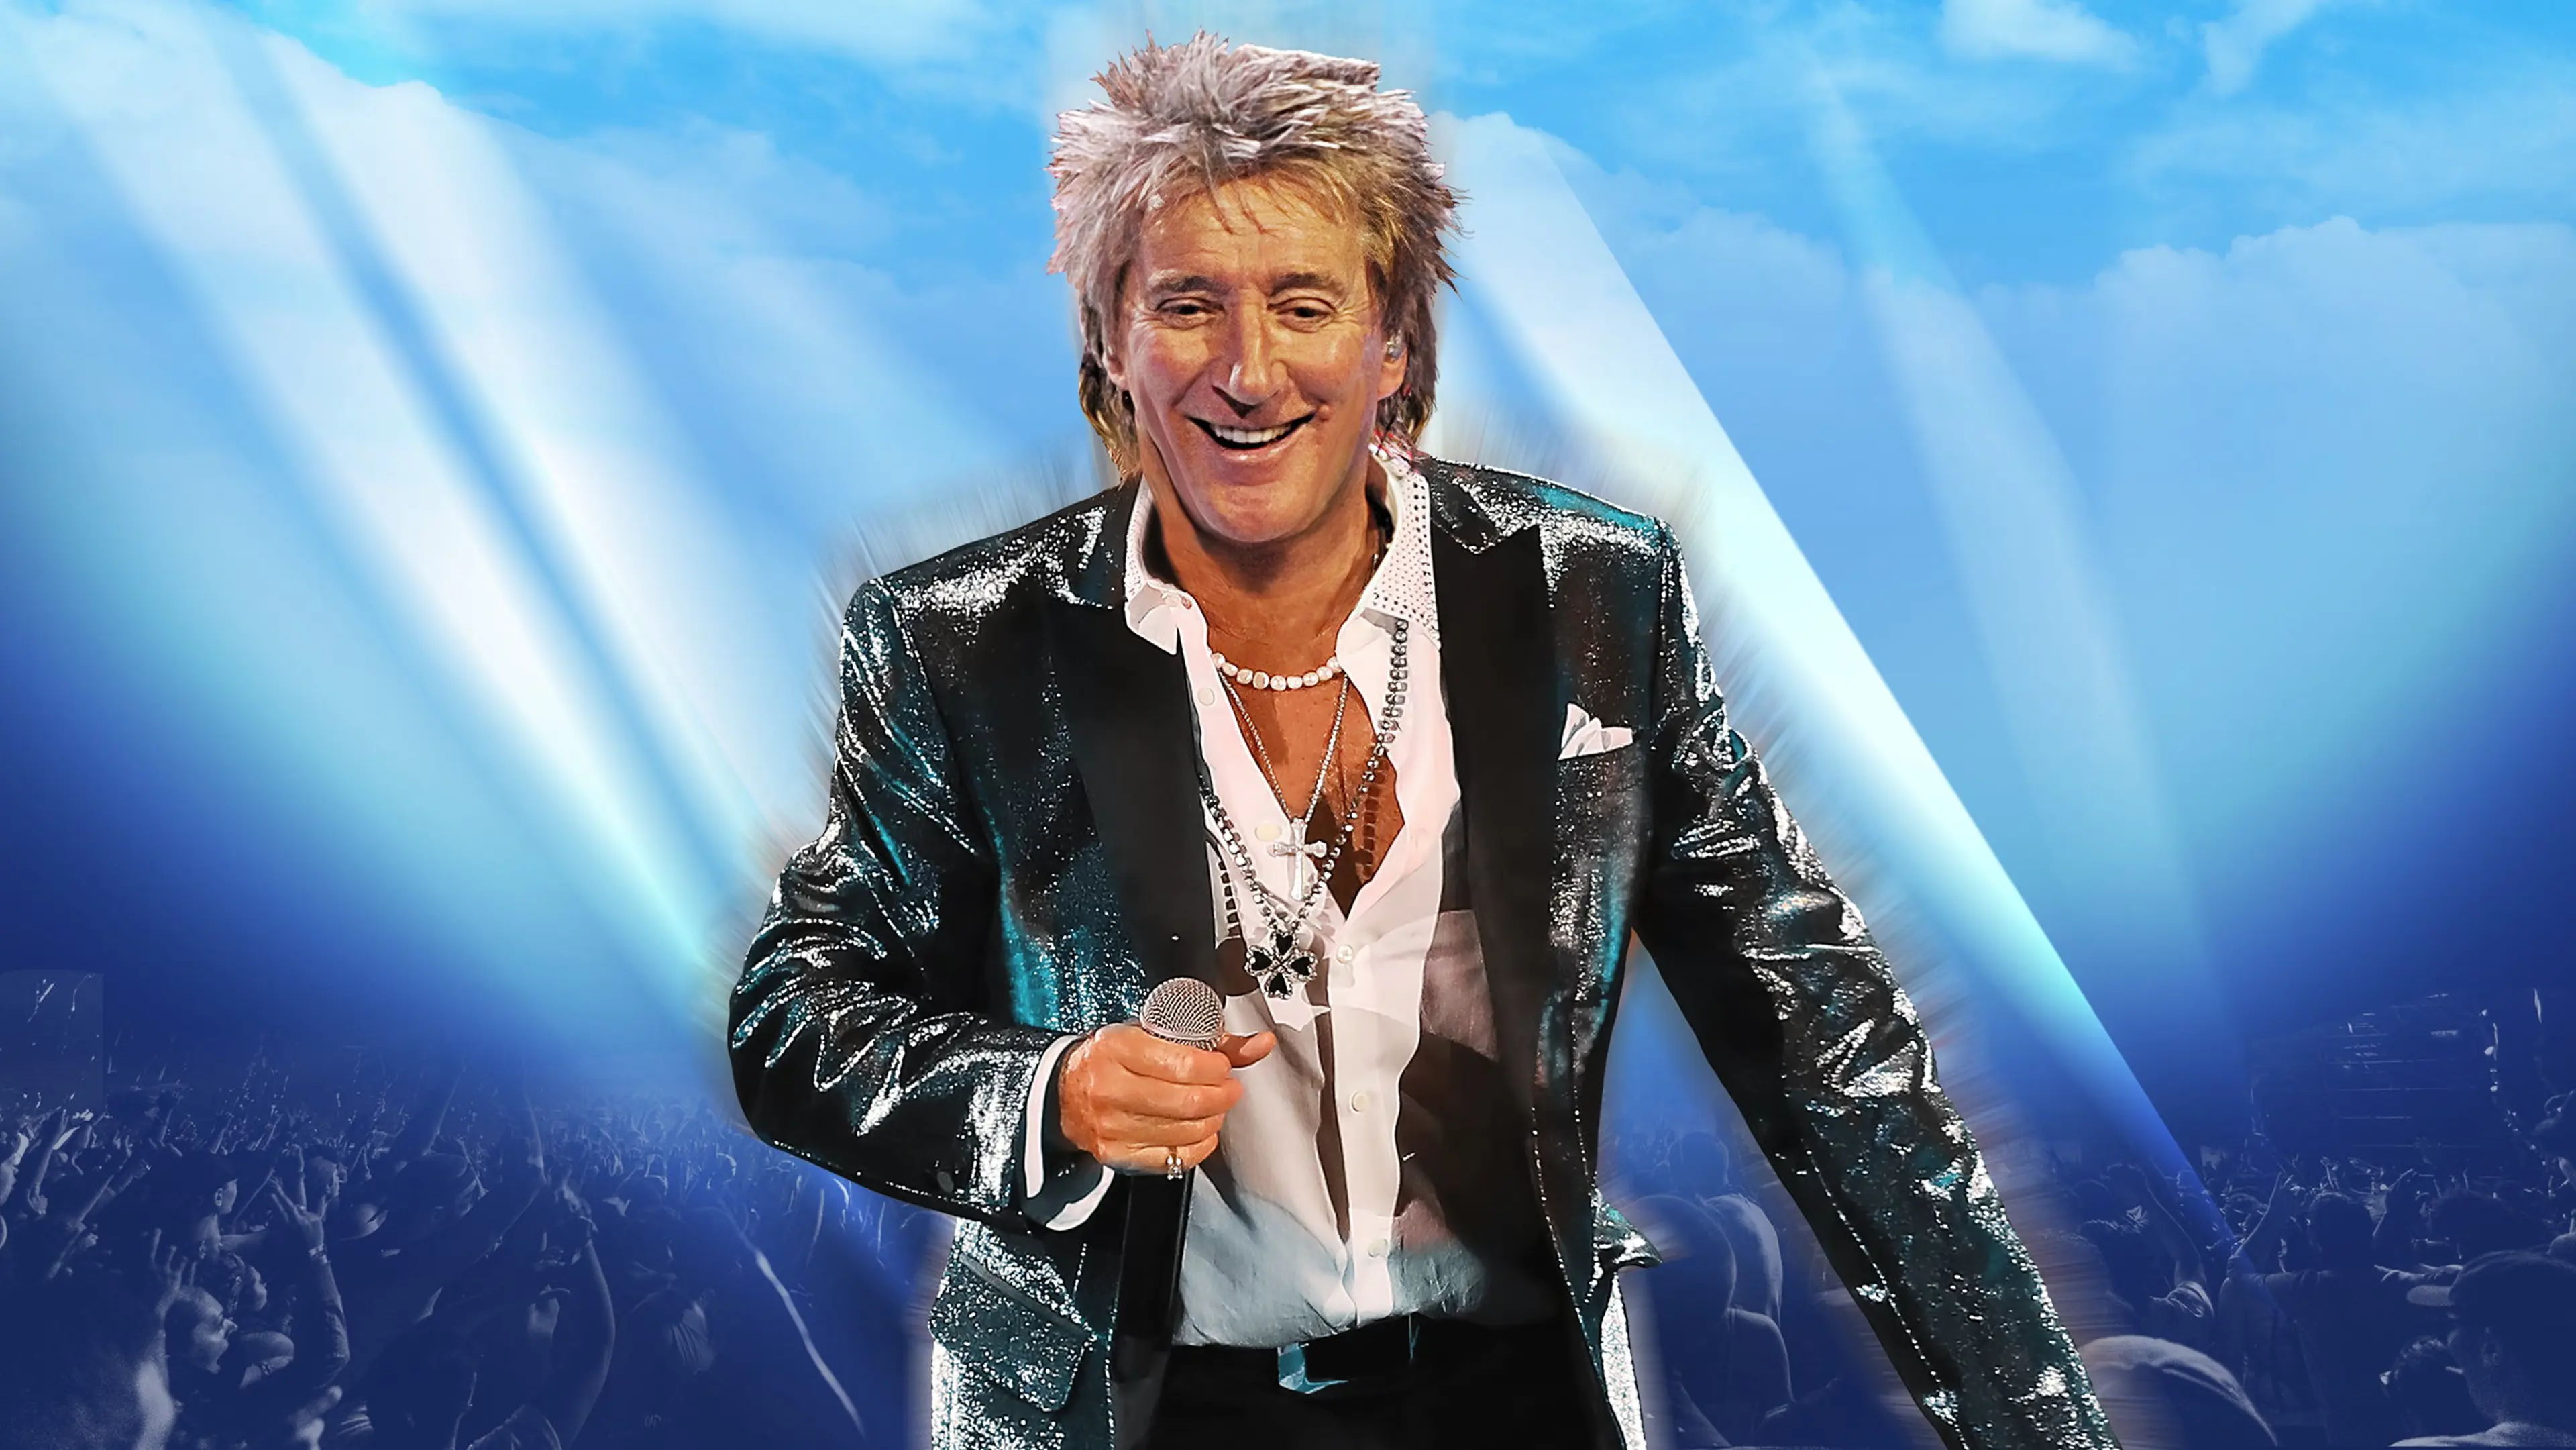 Rod Stewart: Live In Concert - One Last Time